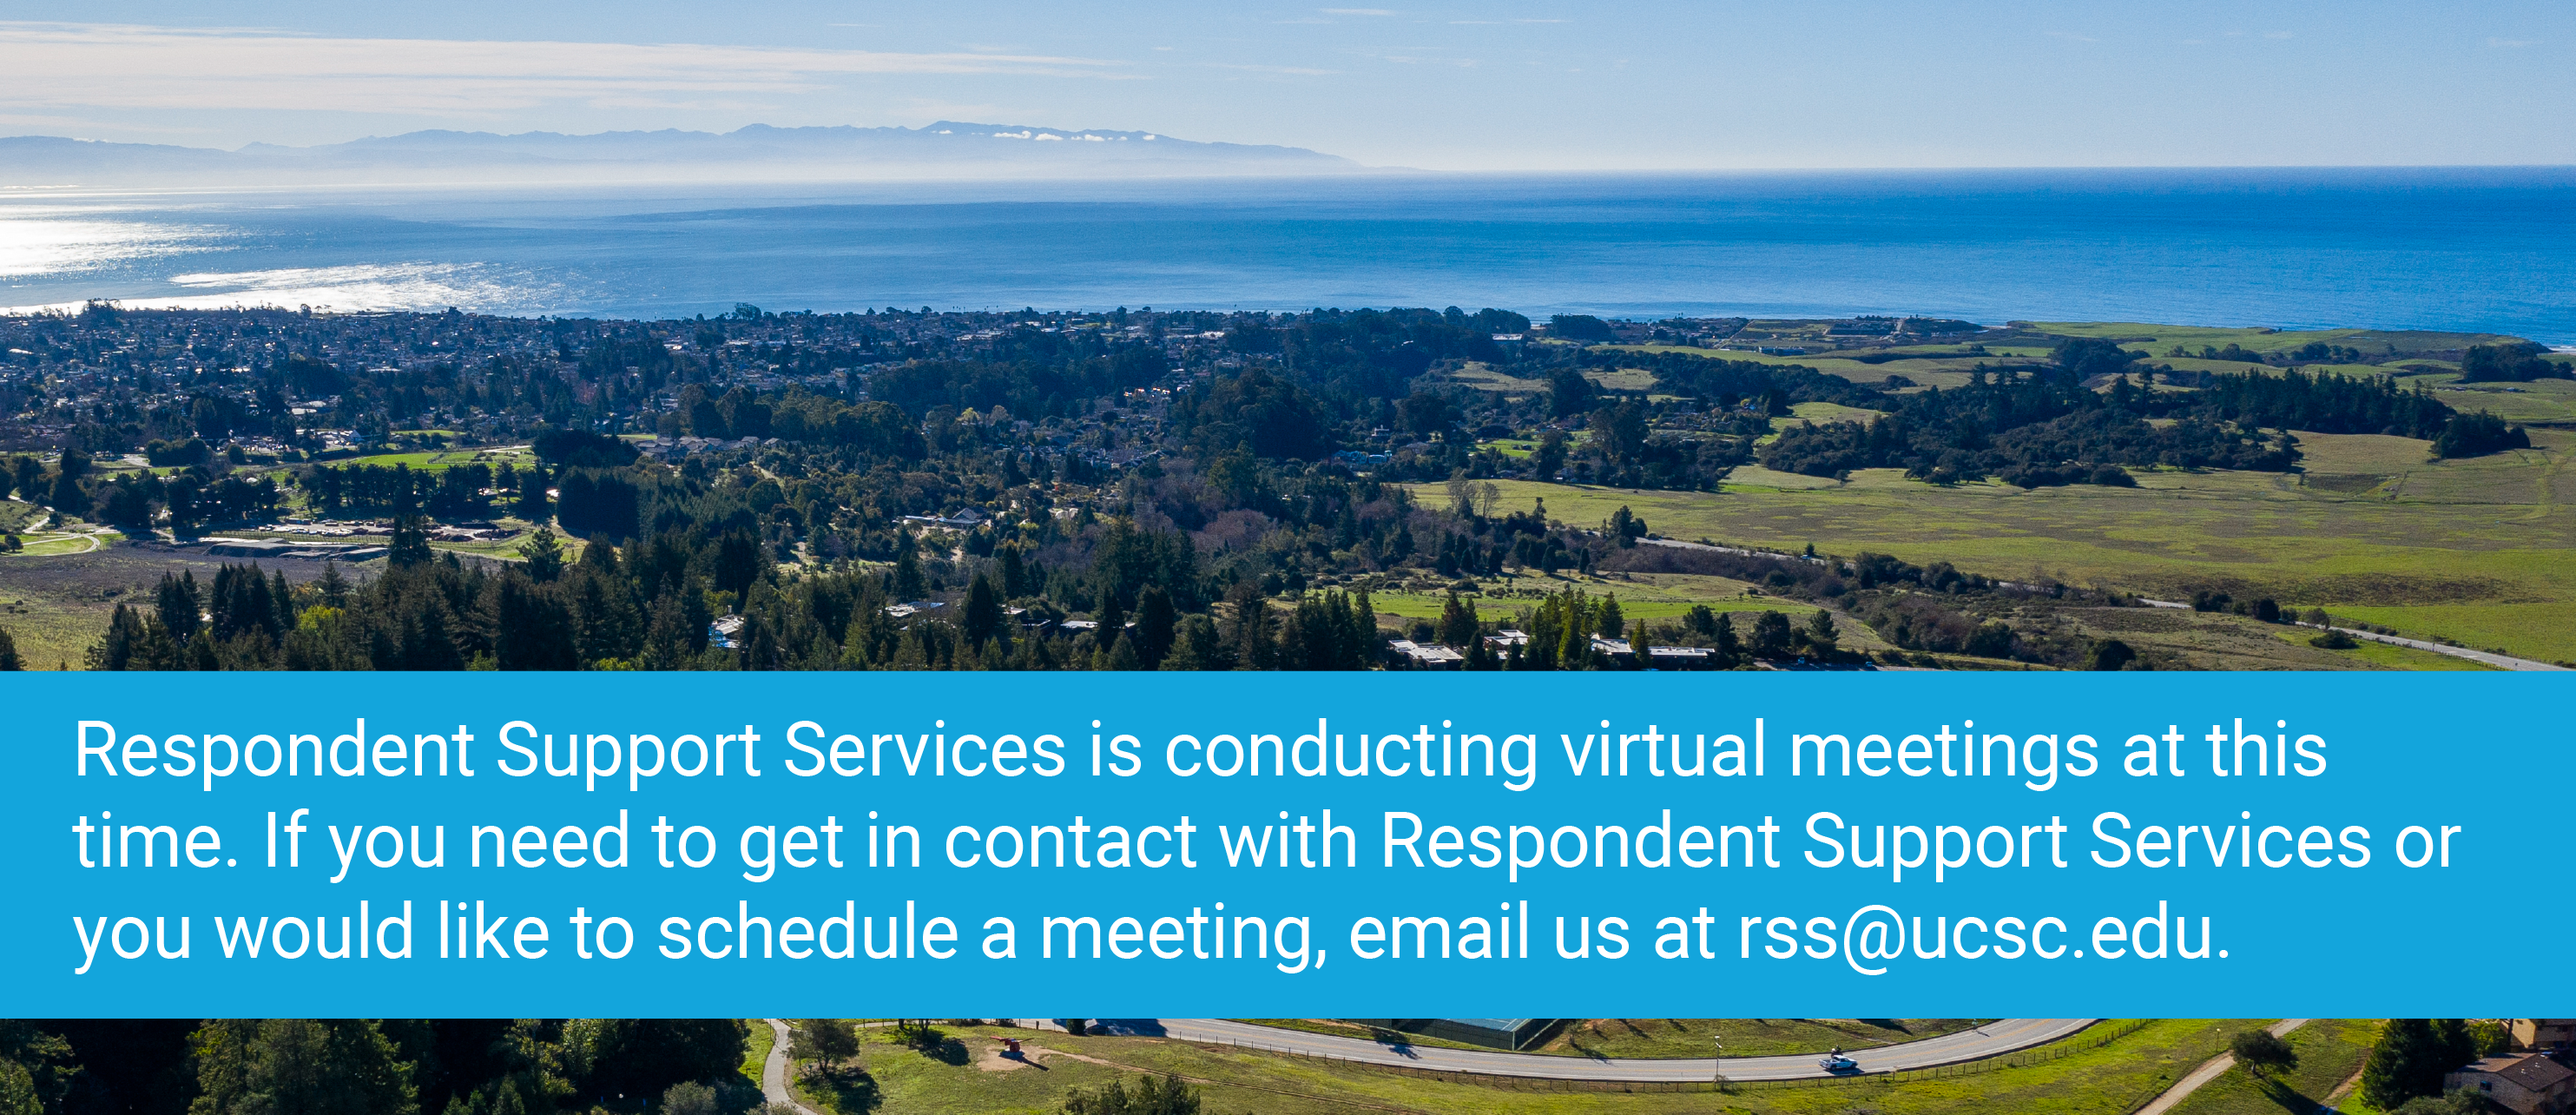 Respondent Support Services is conducting virtual meetings at this time. If you need to get in contact with Respondent Support Services or you would like to schedule a meeting, email us at rss@ucsc.edu.